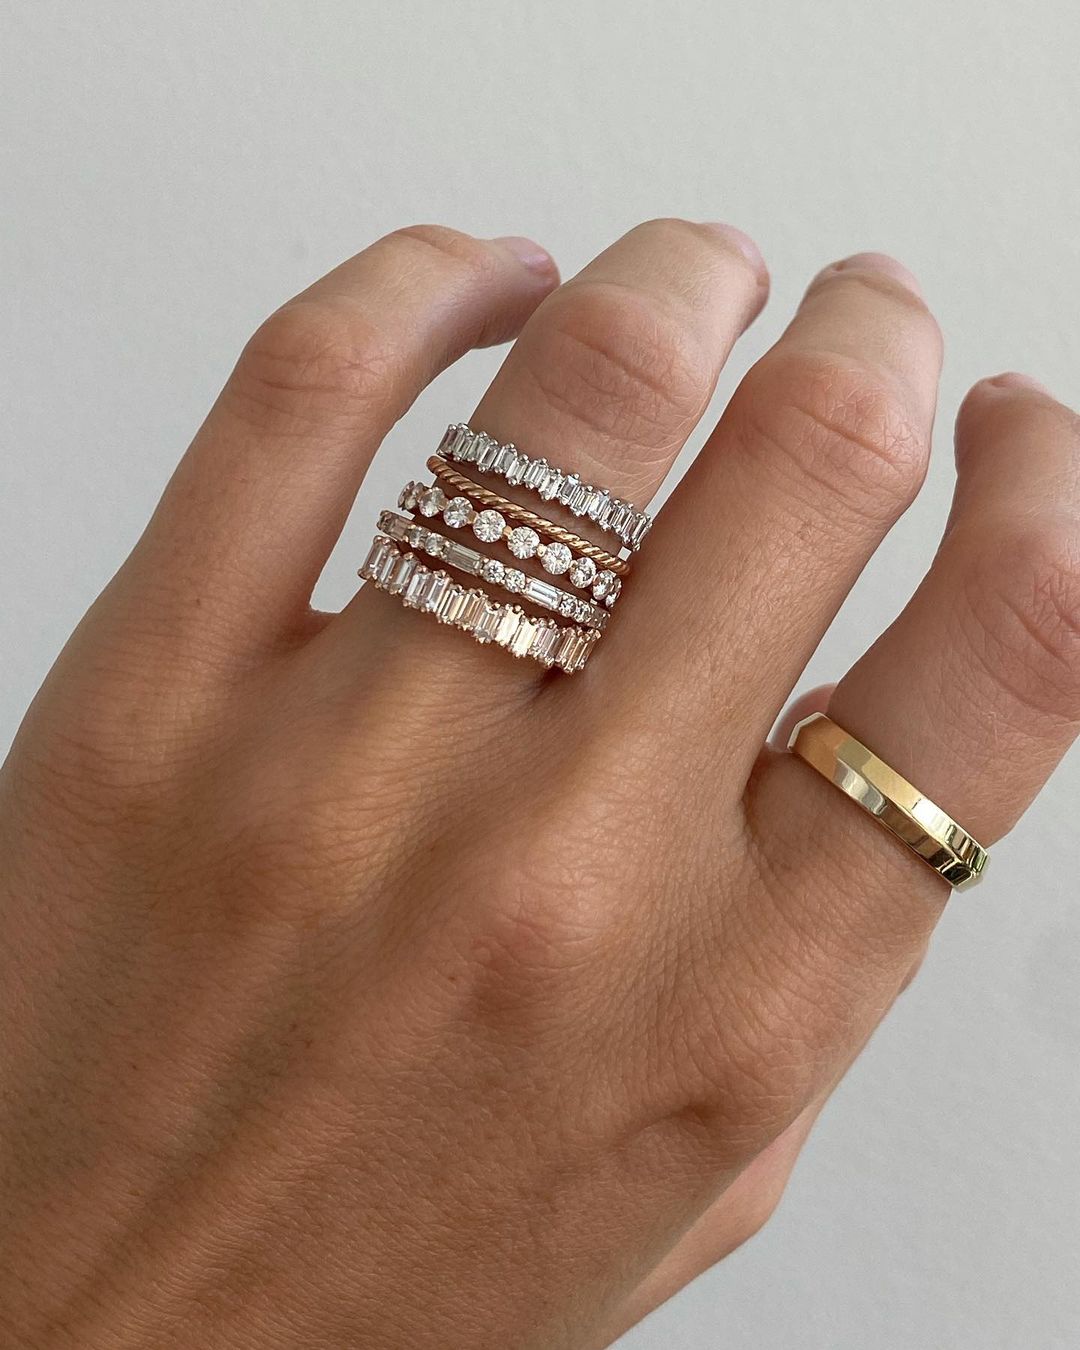 Midi Baguette Diamond Stacker by Good Stone available in Gold and Platinum